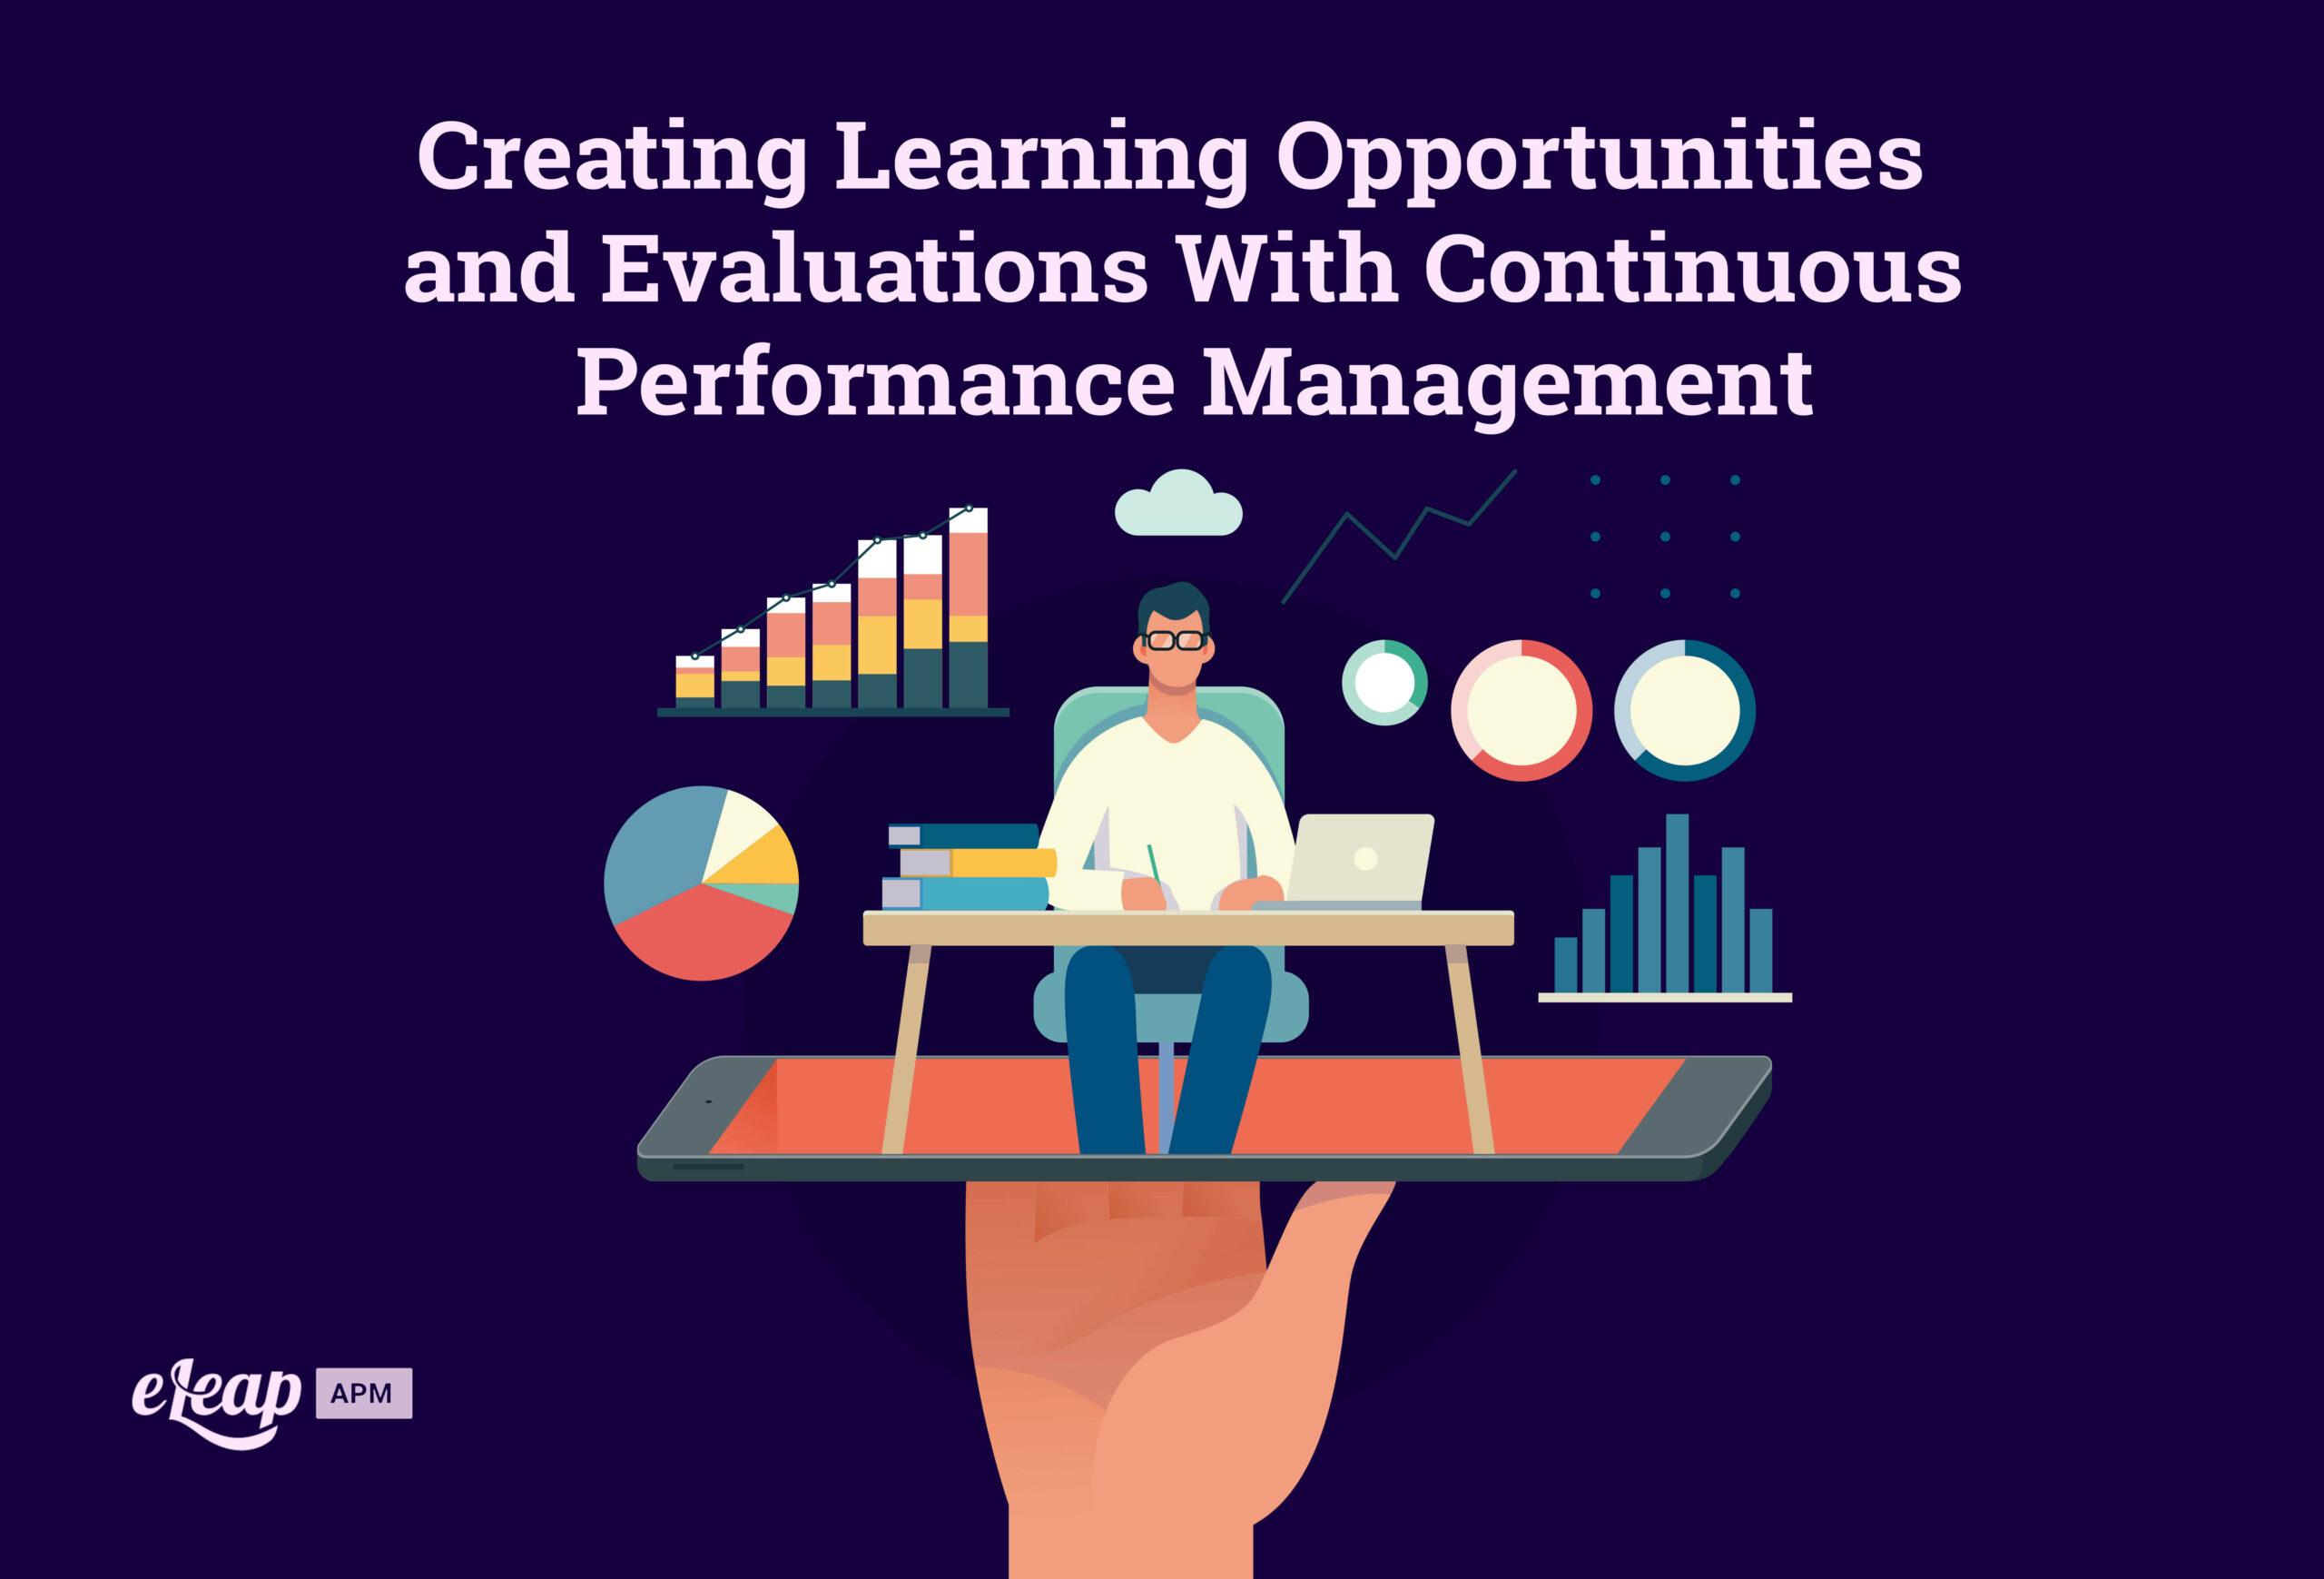 Creating Learning Opportunities and Evaluations With Continuous Performance Management